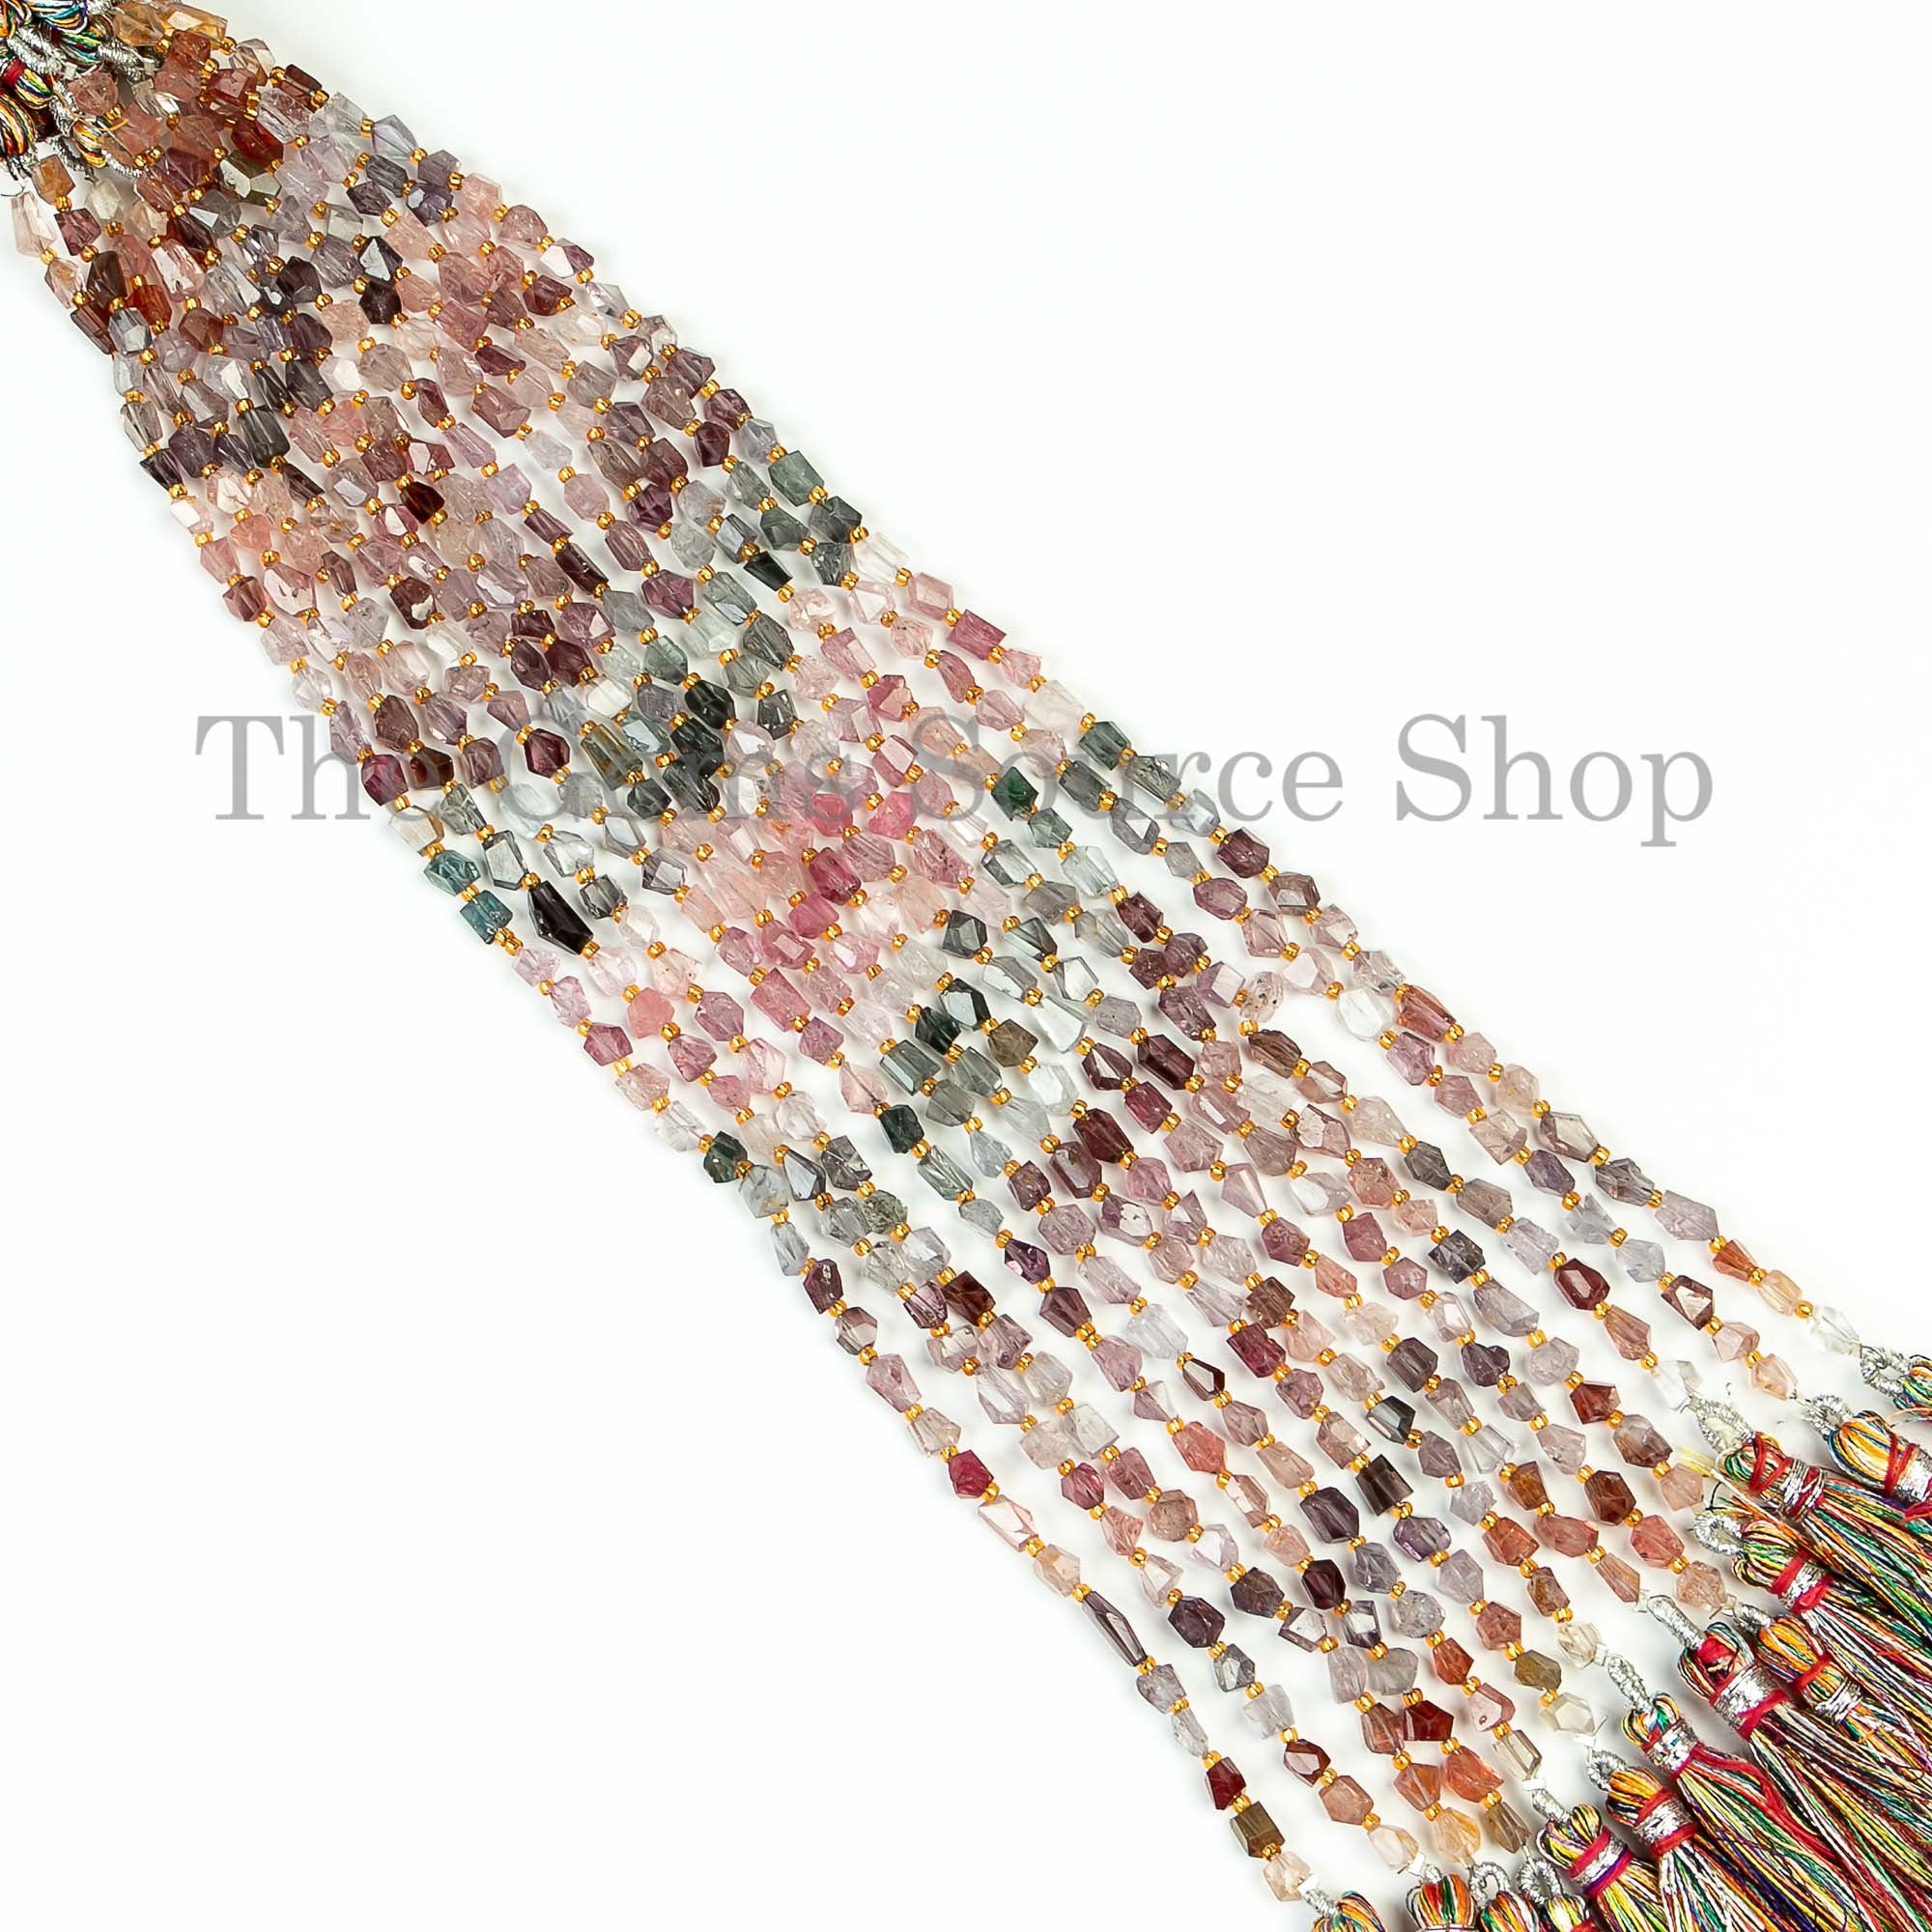 Multi Spinel Faceted Beads, Multi Spinel Nugget Beads, Faceted Nuggets Beads, Gemstone Beads